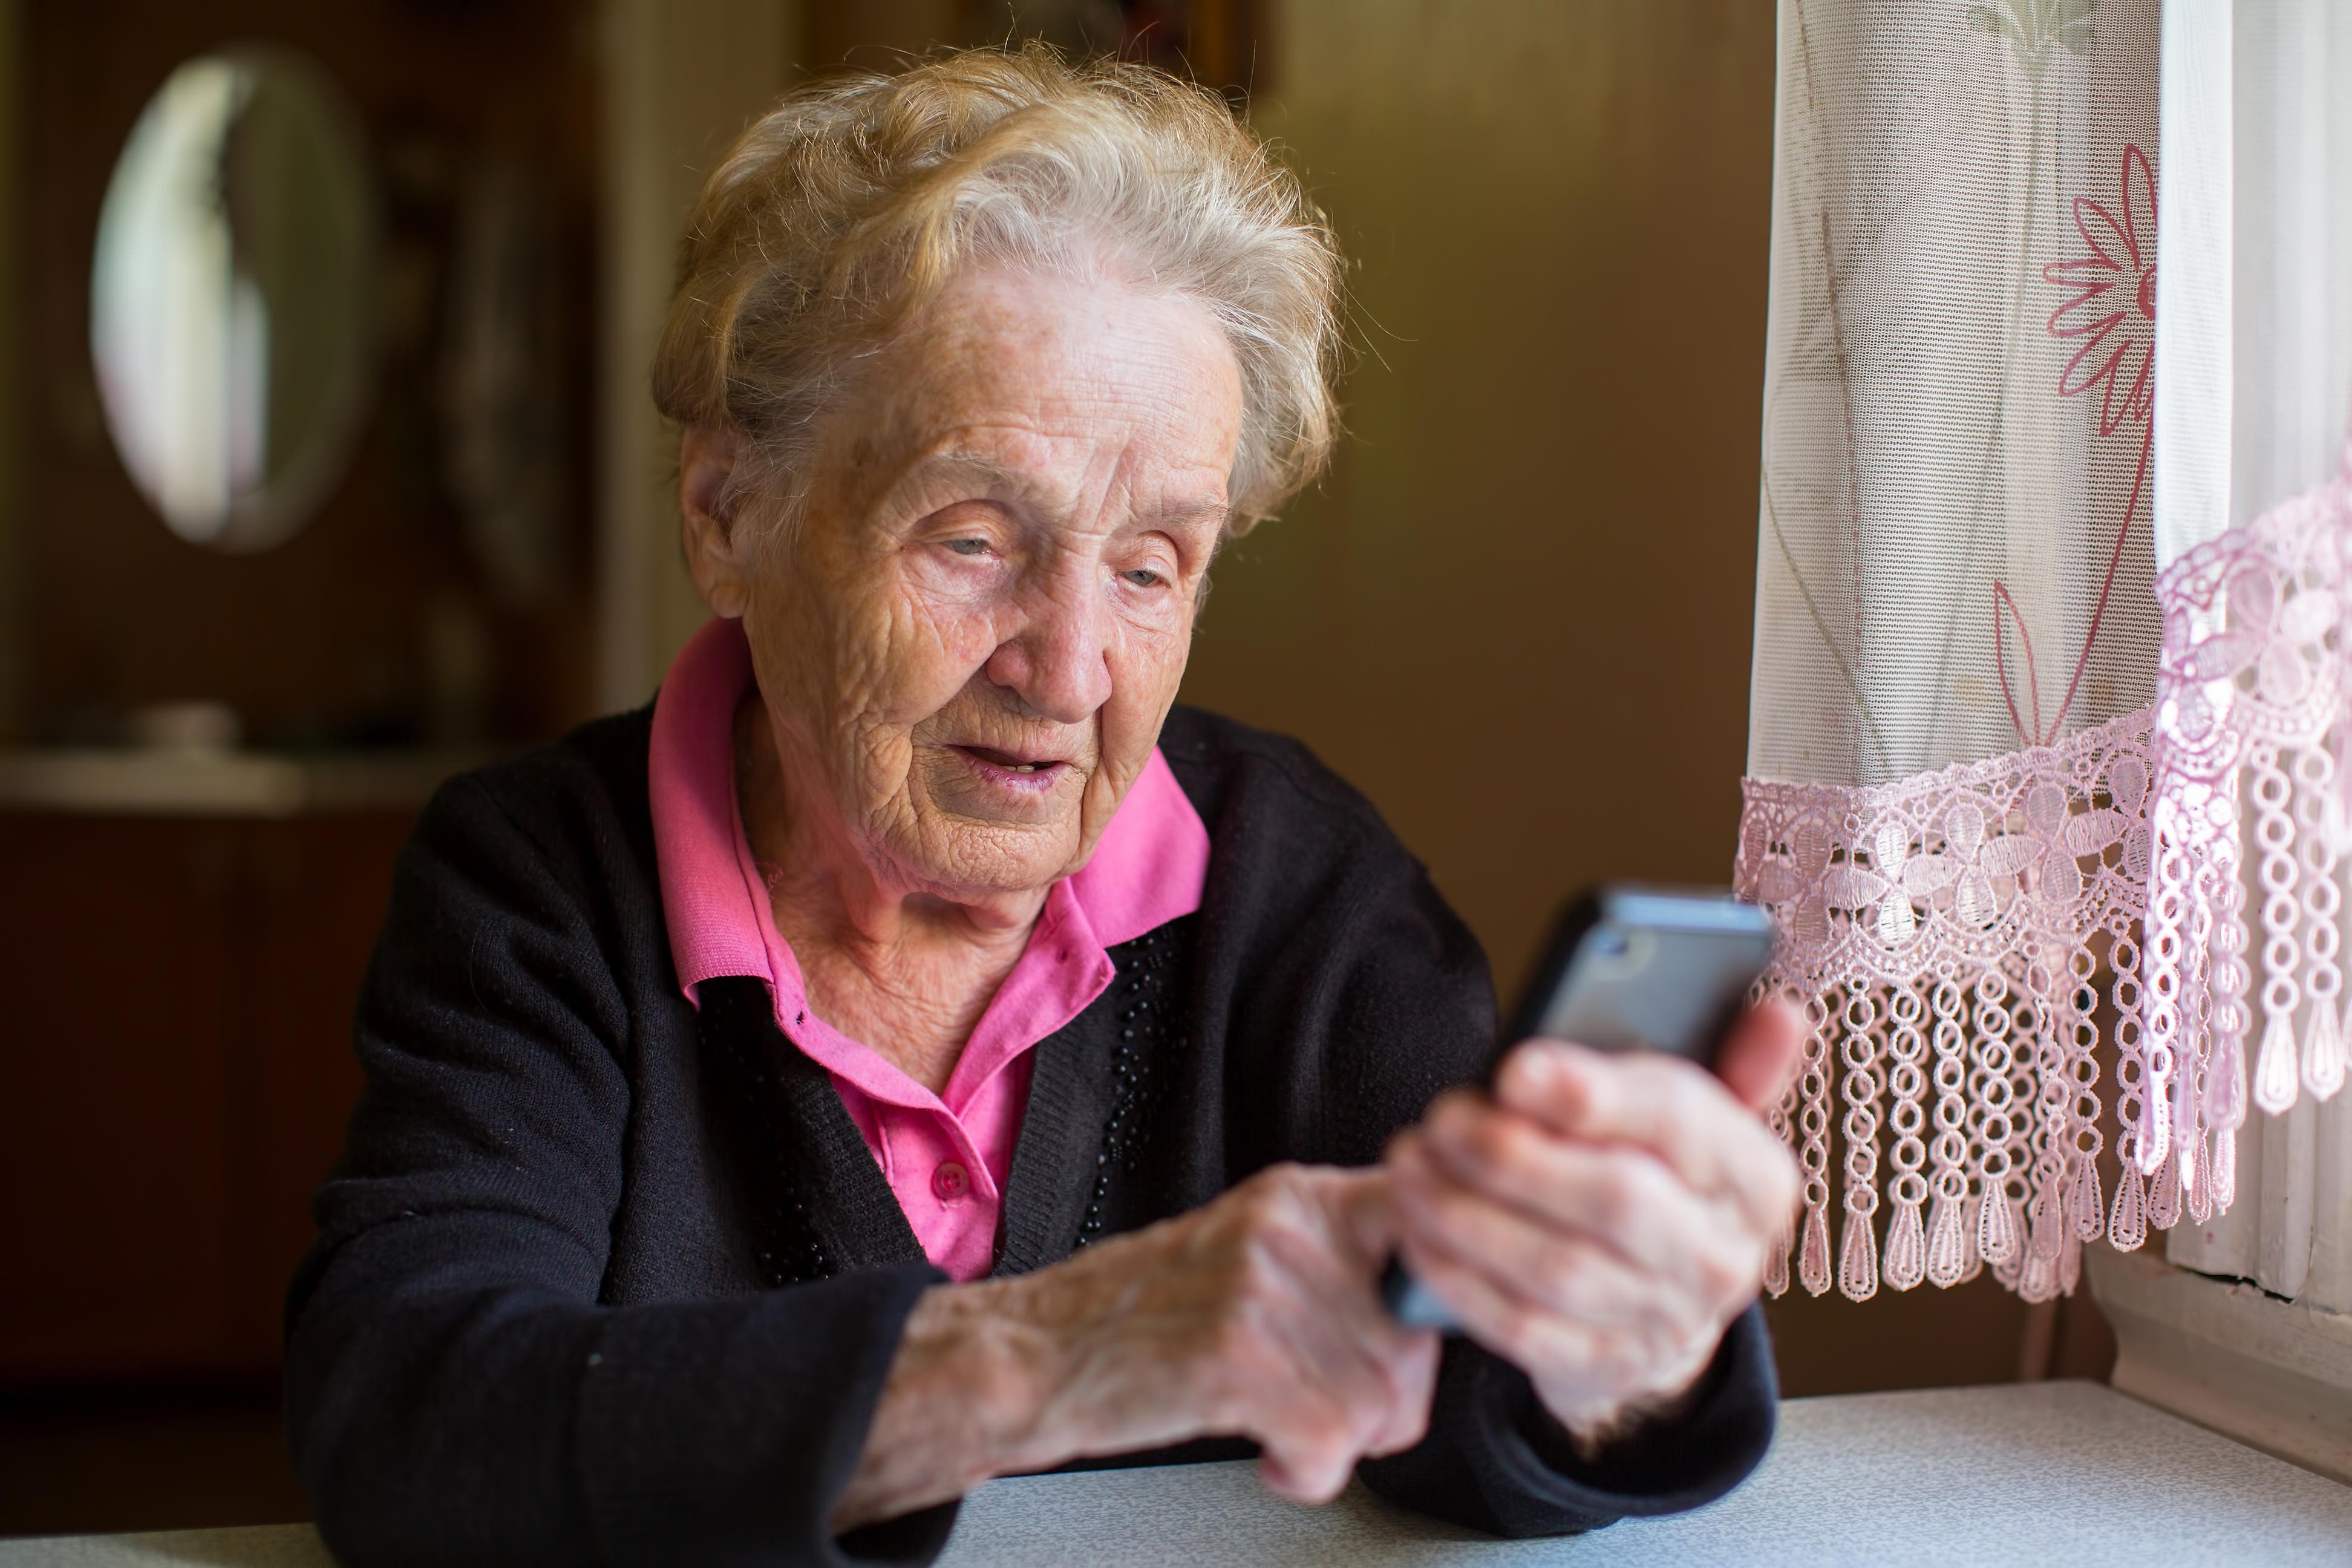 Five gadgets to make life easier for the elderly, from phones with big buttons to a hip protector. Photo: Alamy